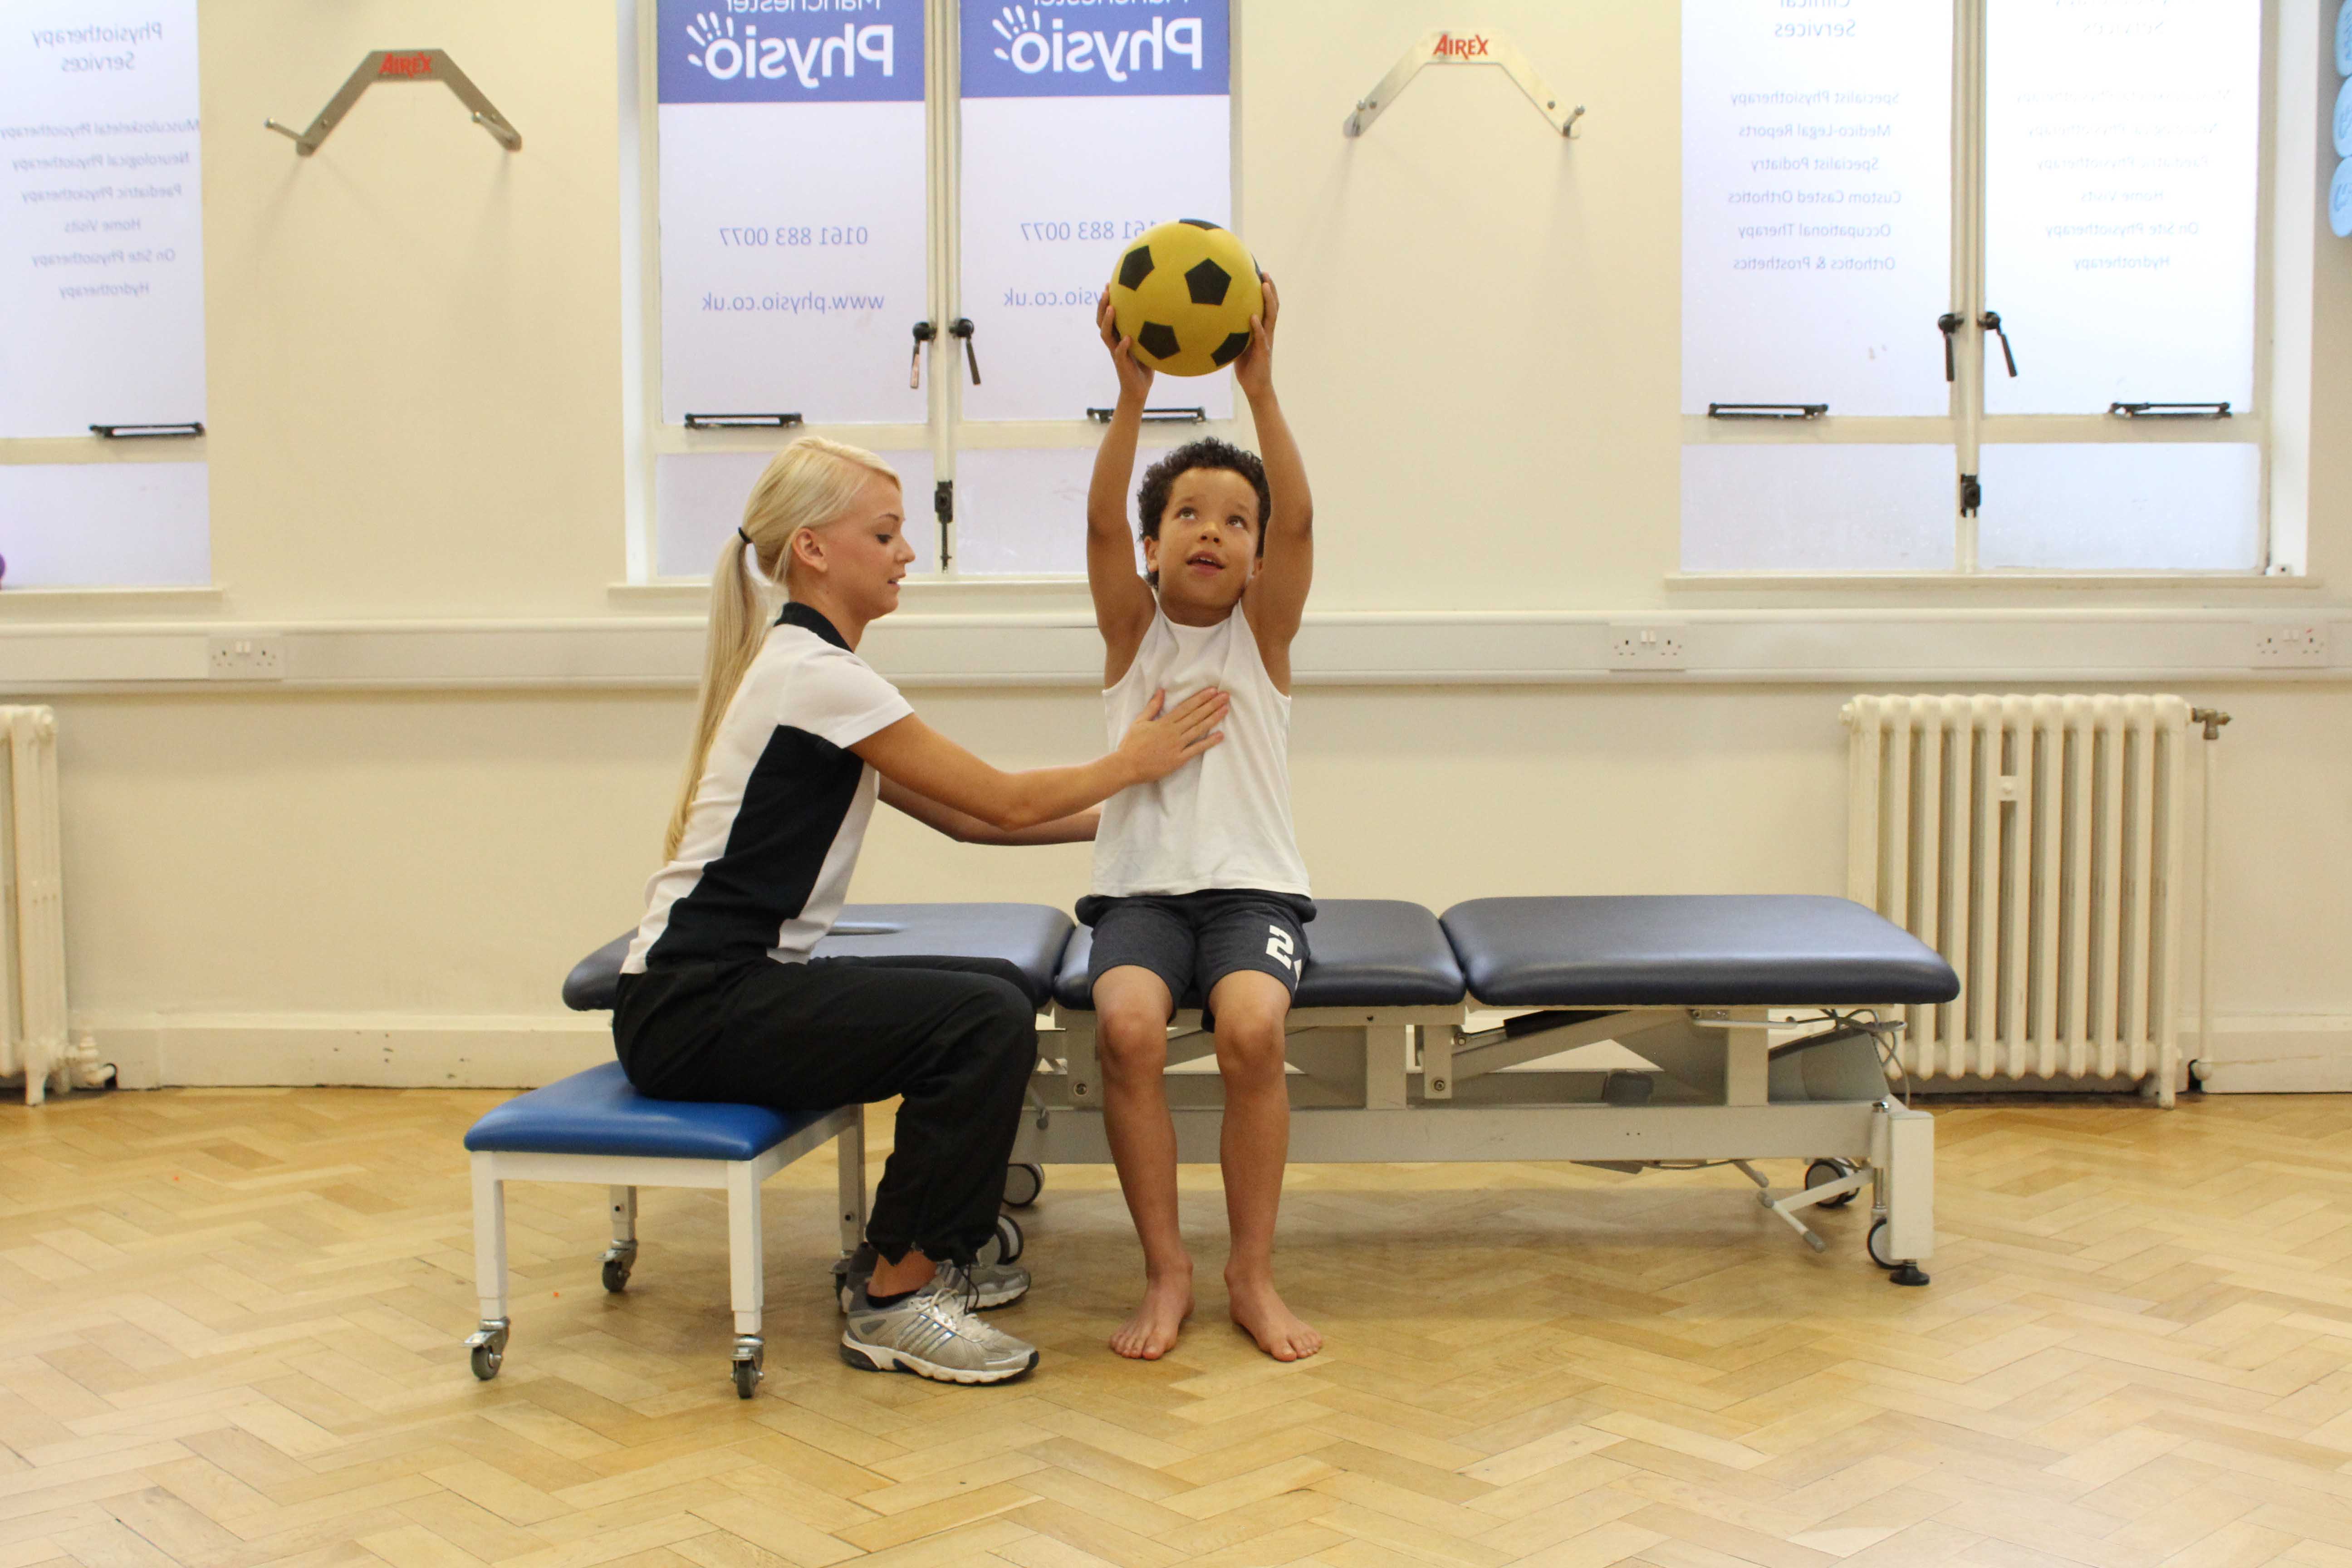 Mobilisation and proprioception exercises supervised by a paediatric physiotherapist